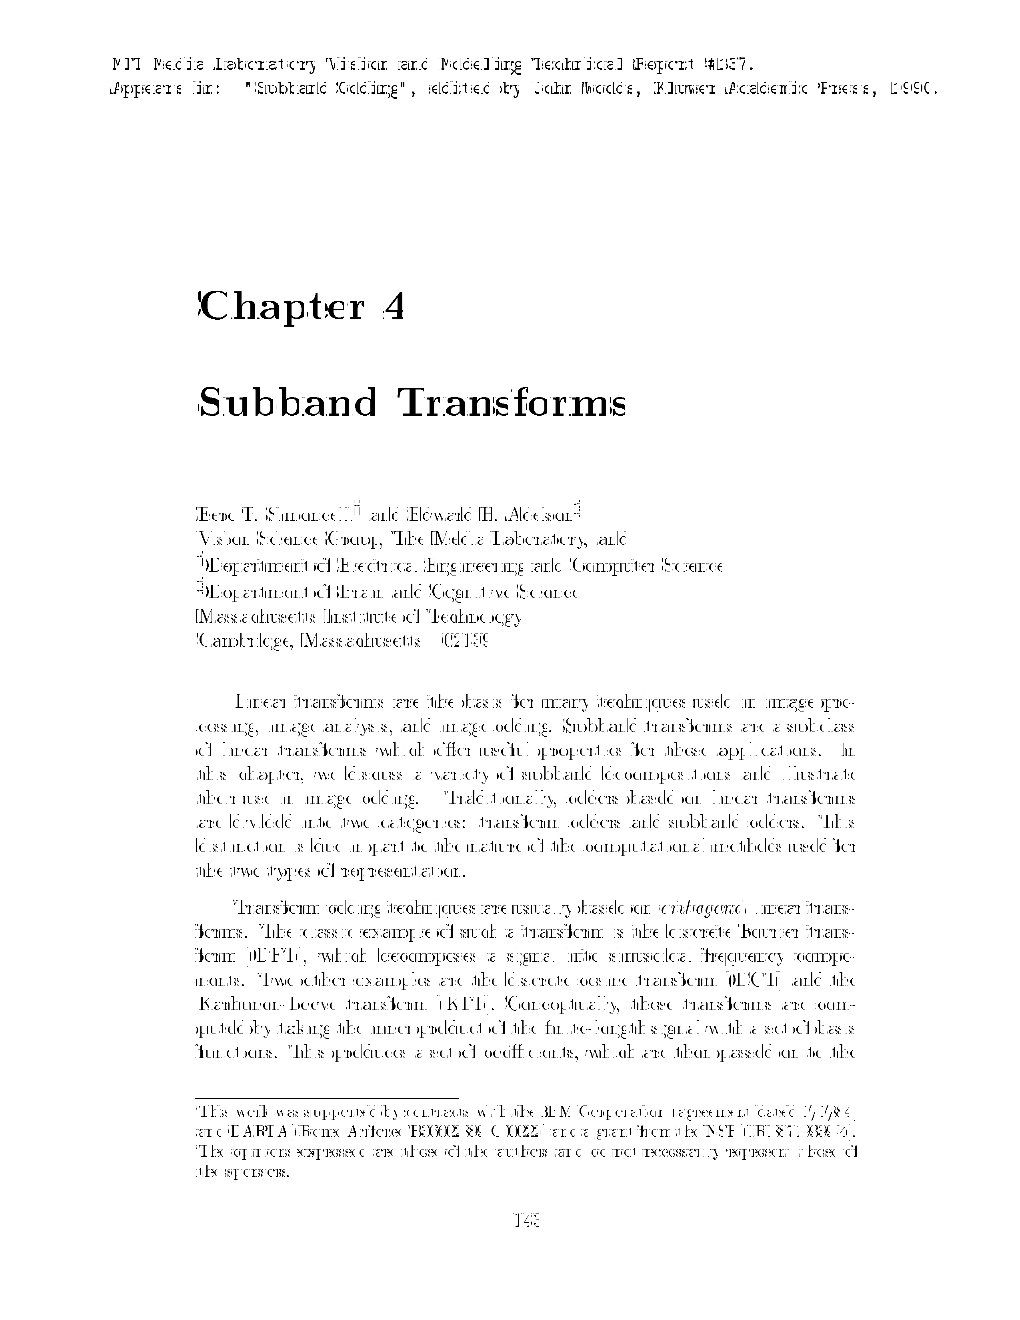 Chapter 4 Subband Transforms